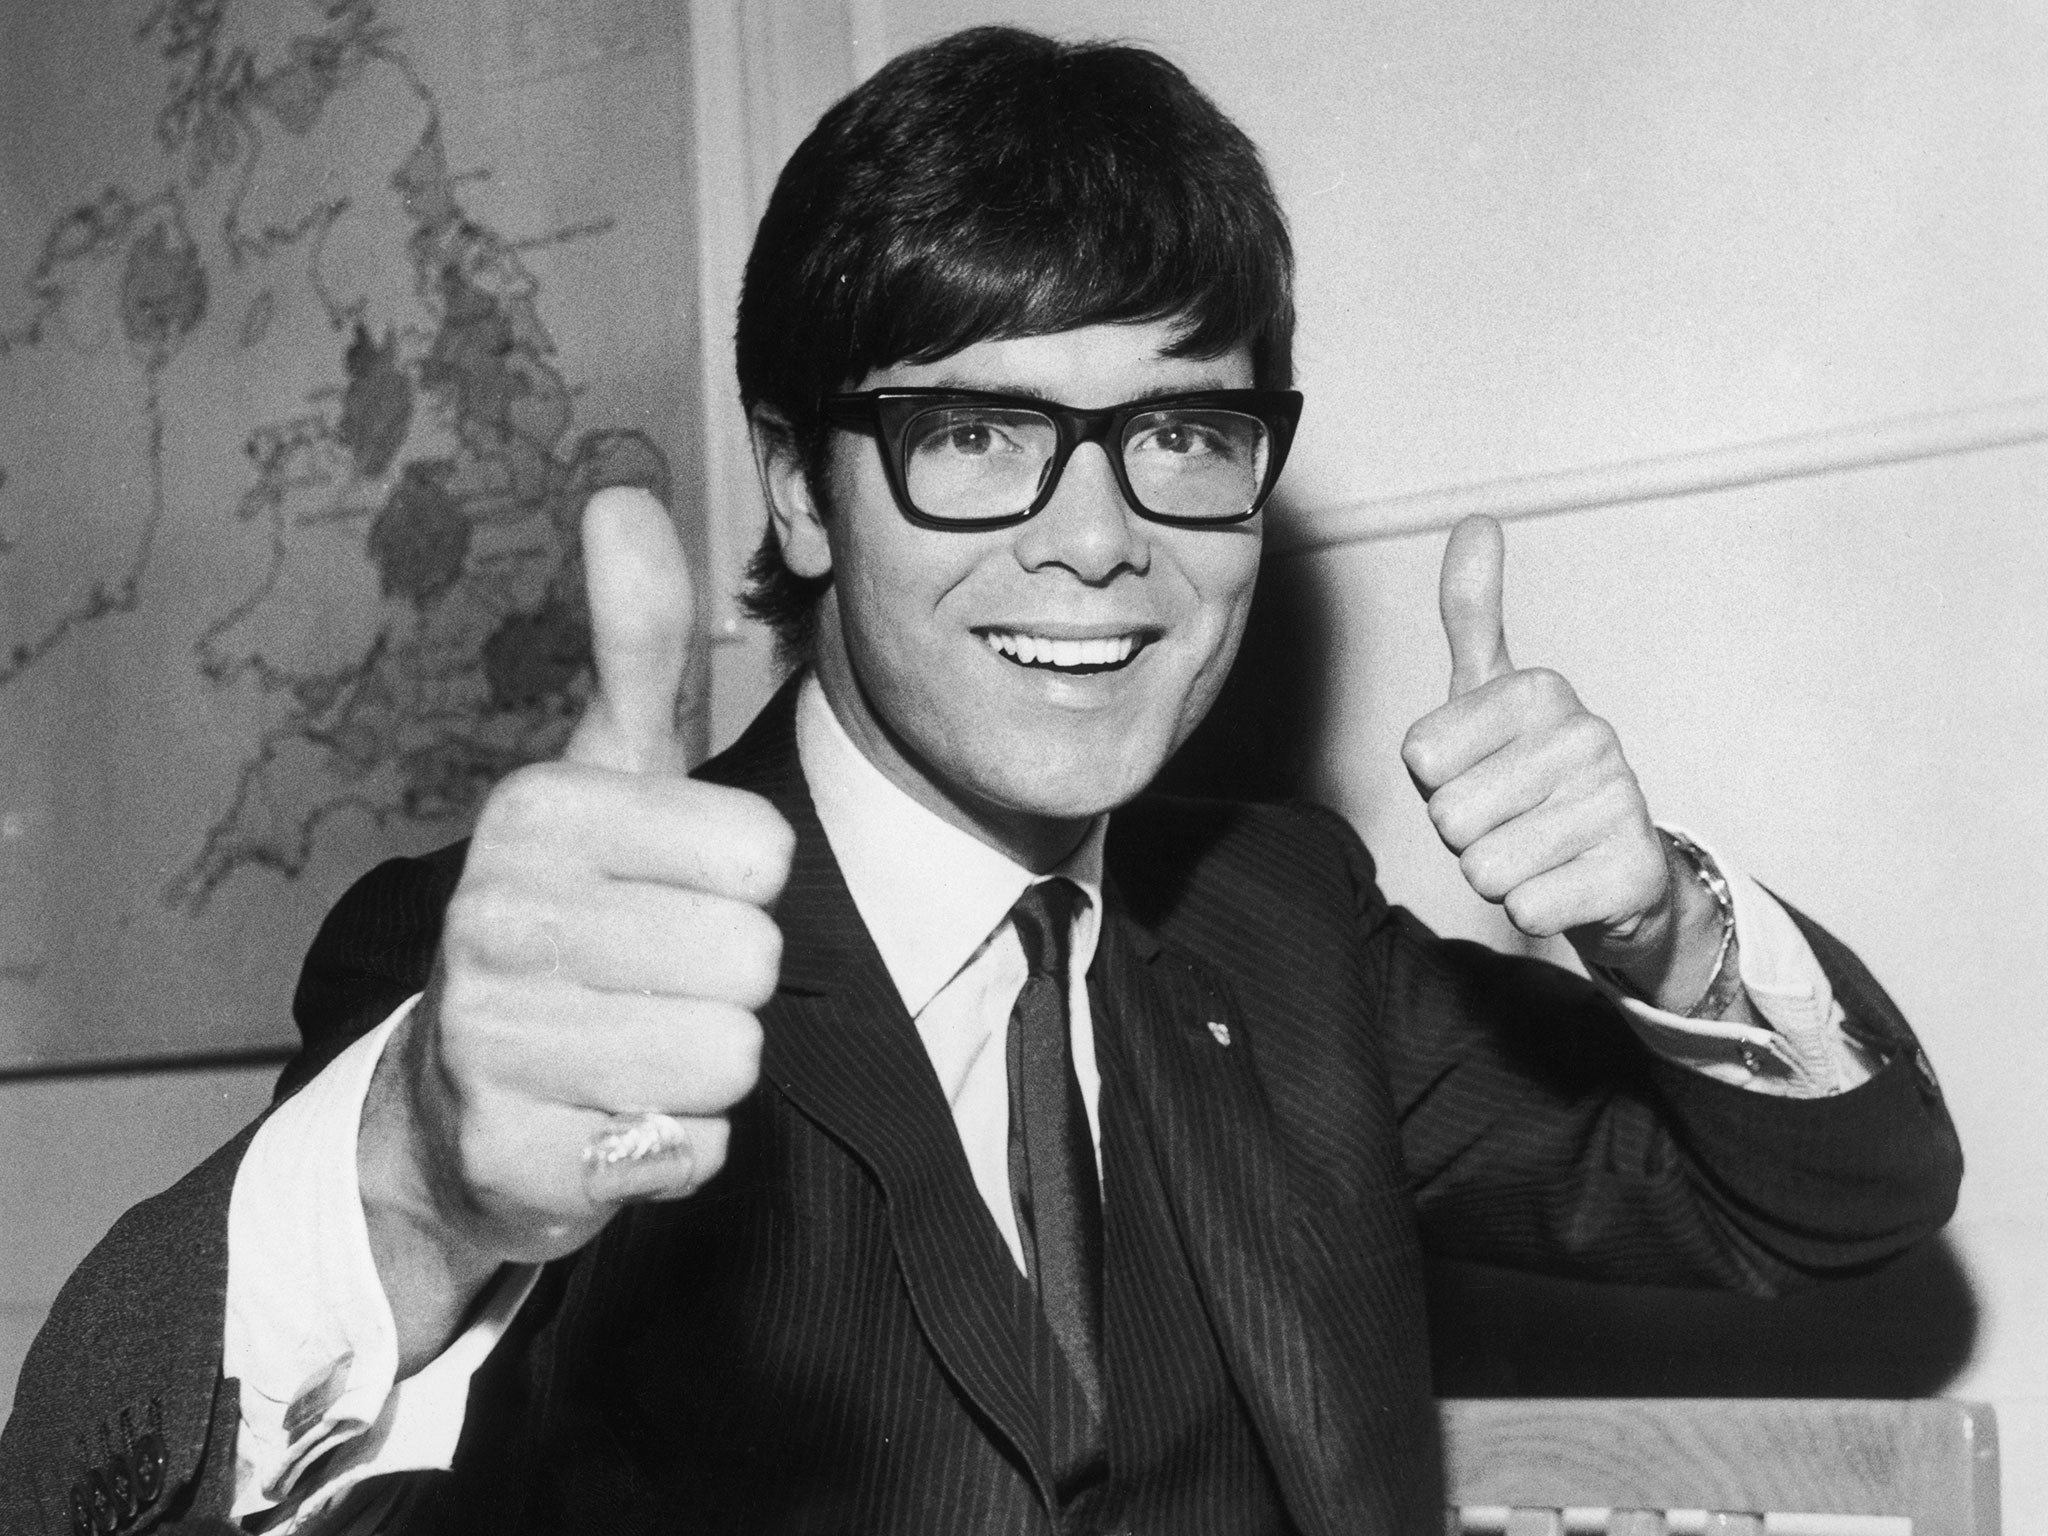 Cliff Richard gives a thumbs up after finding out he will represent the UK at the Eurovision Song Contest